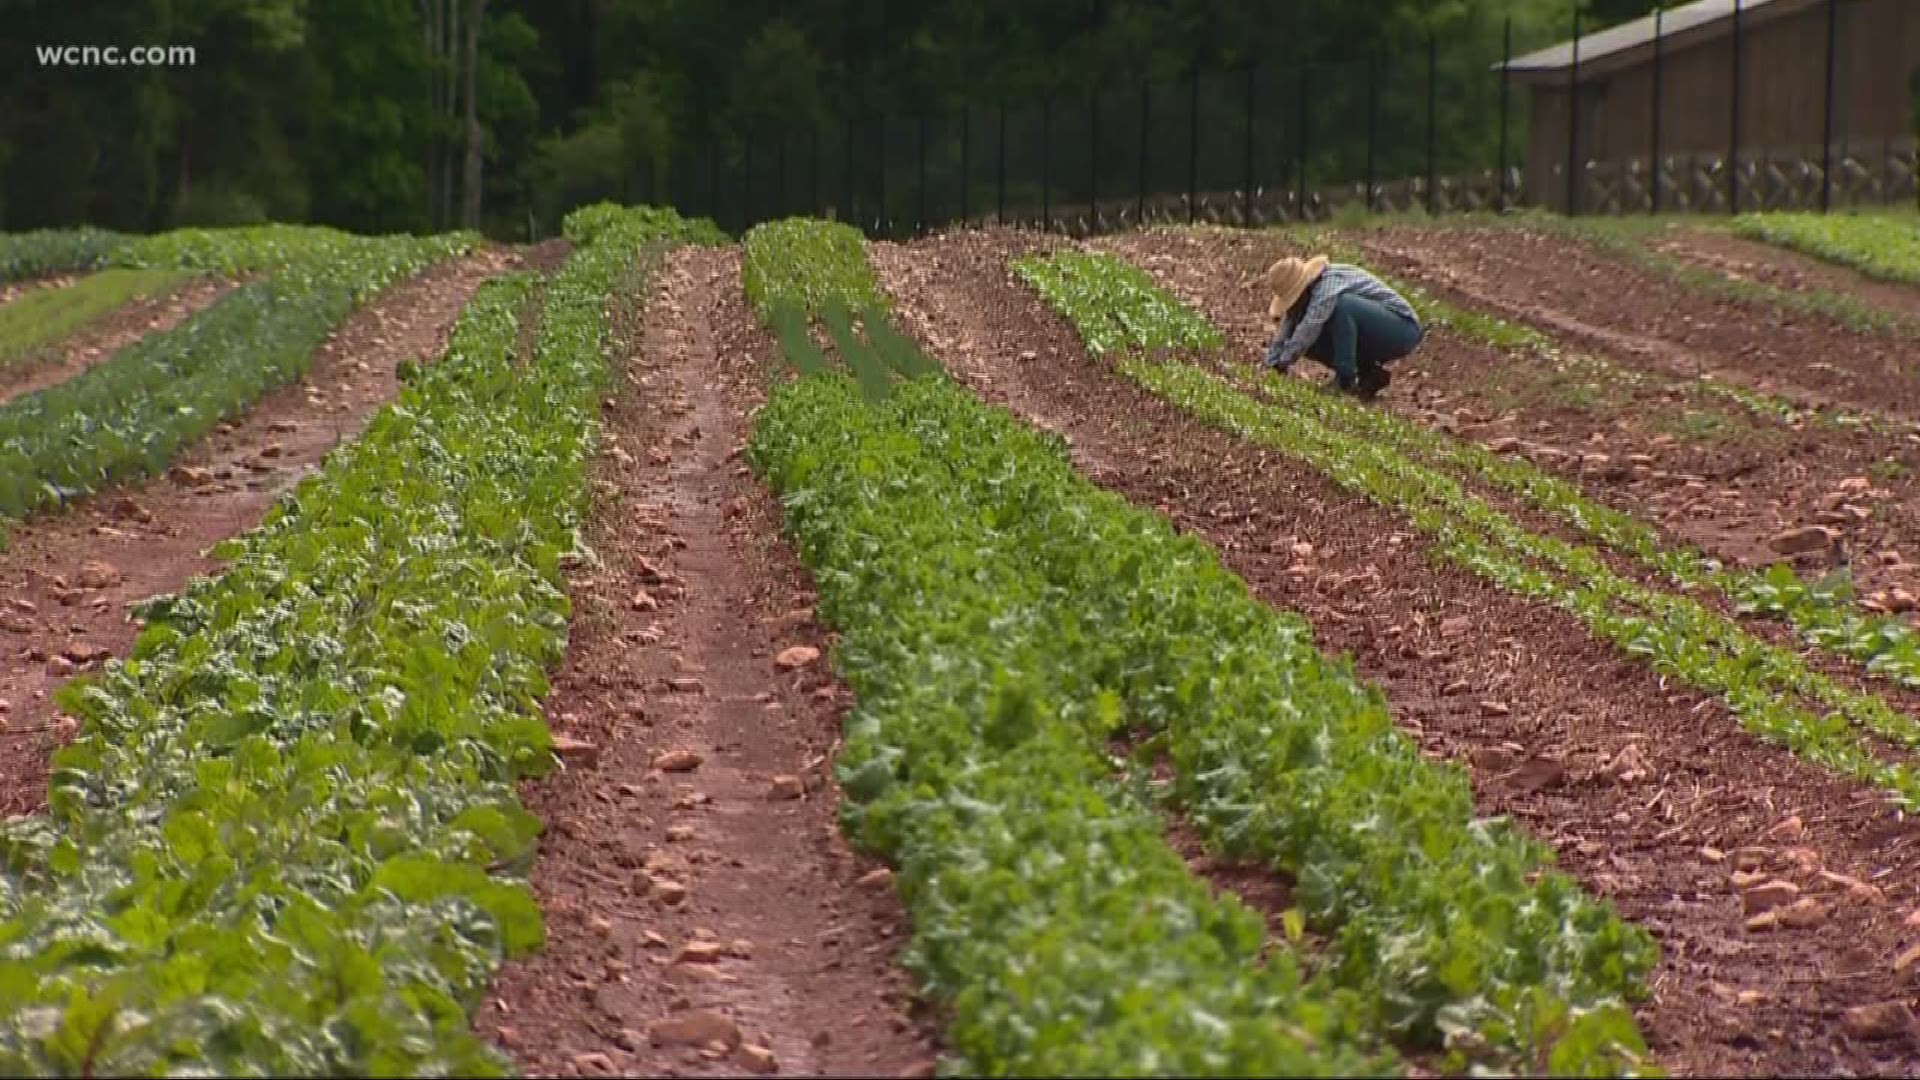 Former Belk CEO turns to farming